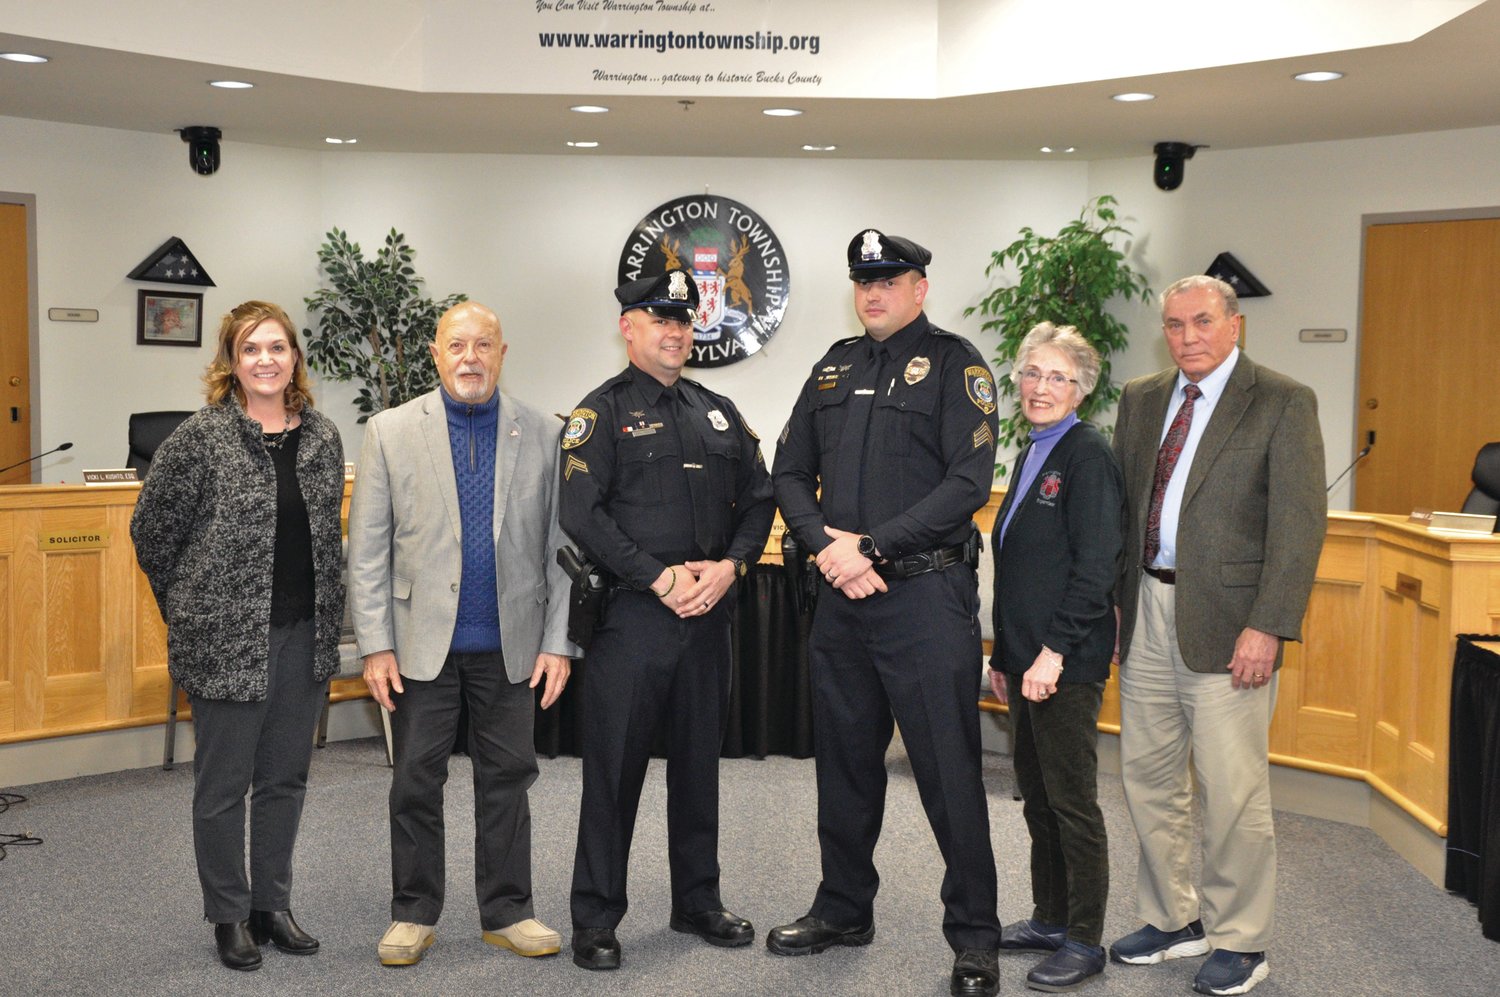 Warrington Supervisors stand with newly promoted officers in its township police department. Shown are (from left) Supervisor Vanessa Maurer, Supervisors’ Chairman Fred Gaines,  Cpl. Brian Kelly, Sgt. Aaron Menzies, Supervisors Vice-Chair Ruth L. Schemm, and Supervisor Michael J. Diorka.